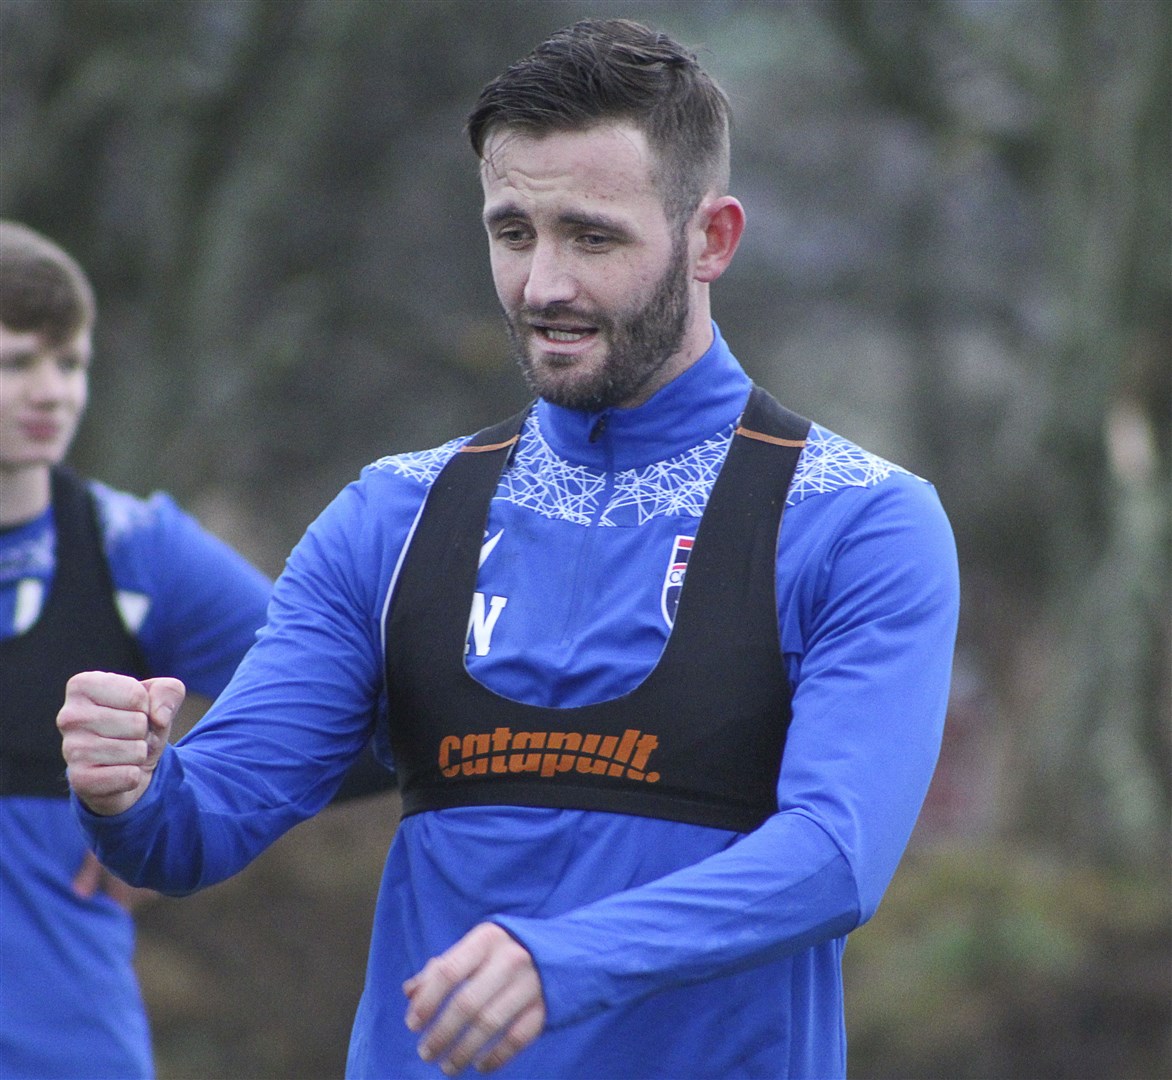 Ross County's new signing Jason Naismith at training in Dingwall this week ahead of Saturday’s home match against St. Johnstone. Pictures: Ken Macpherson